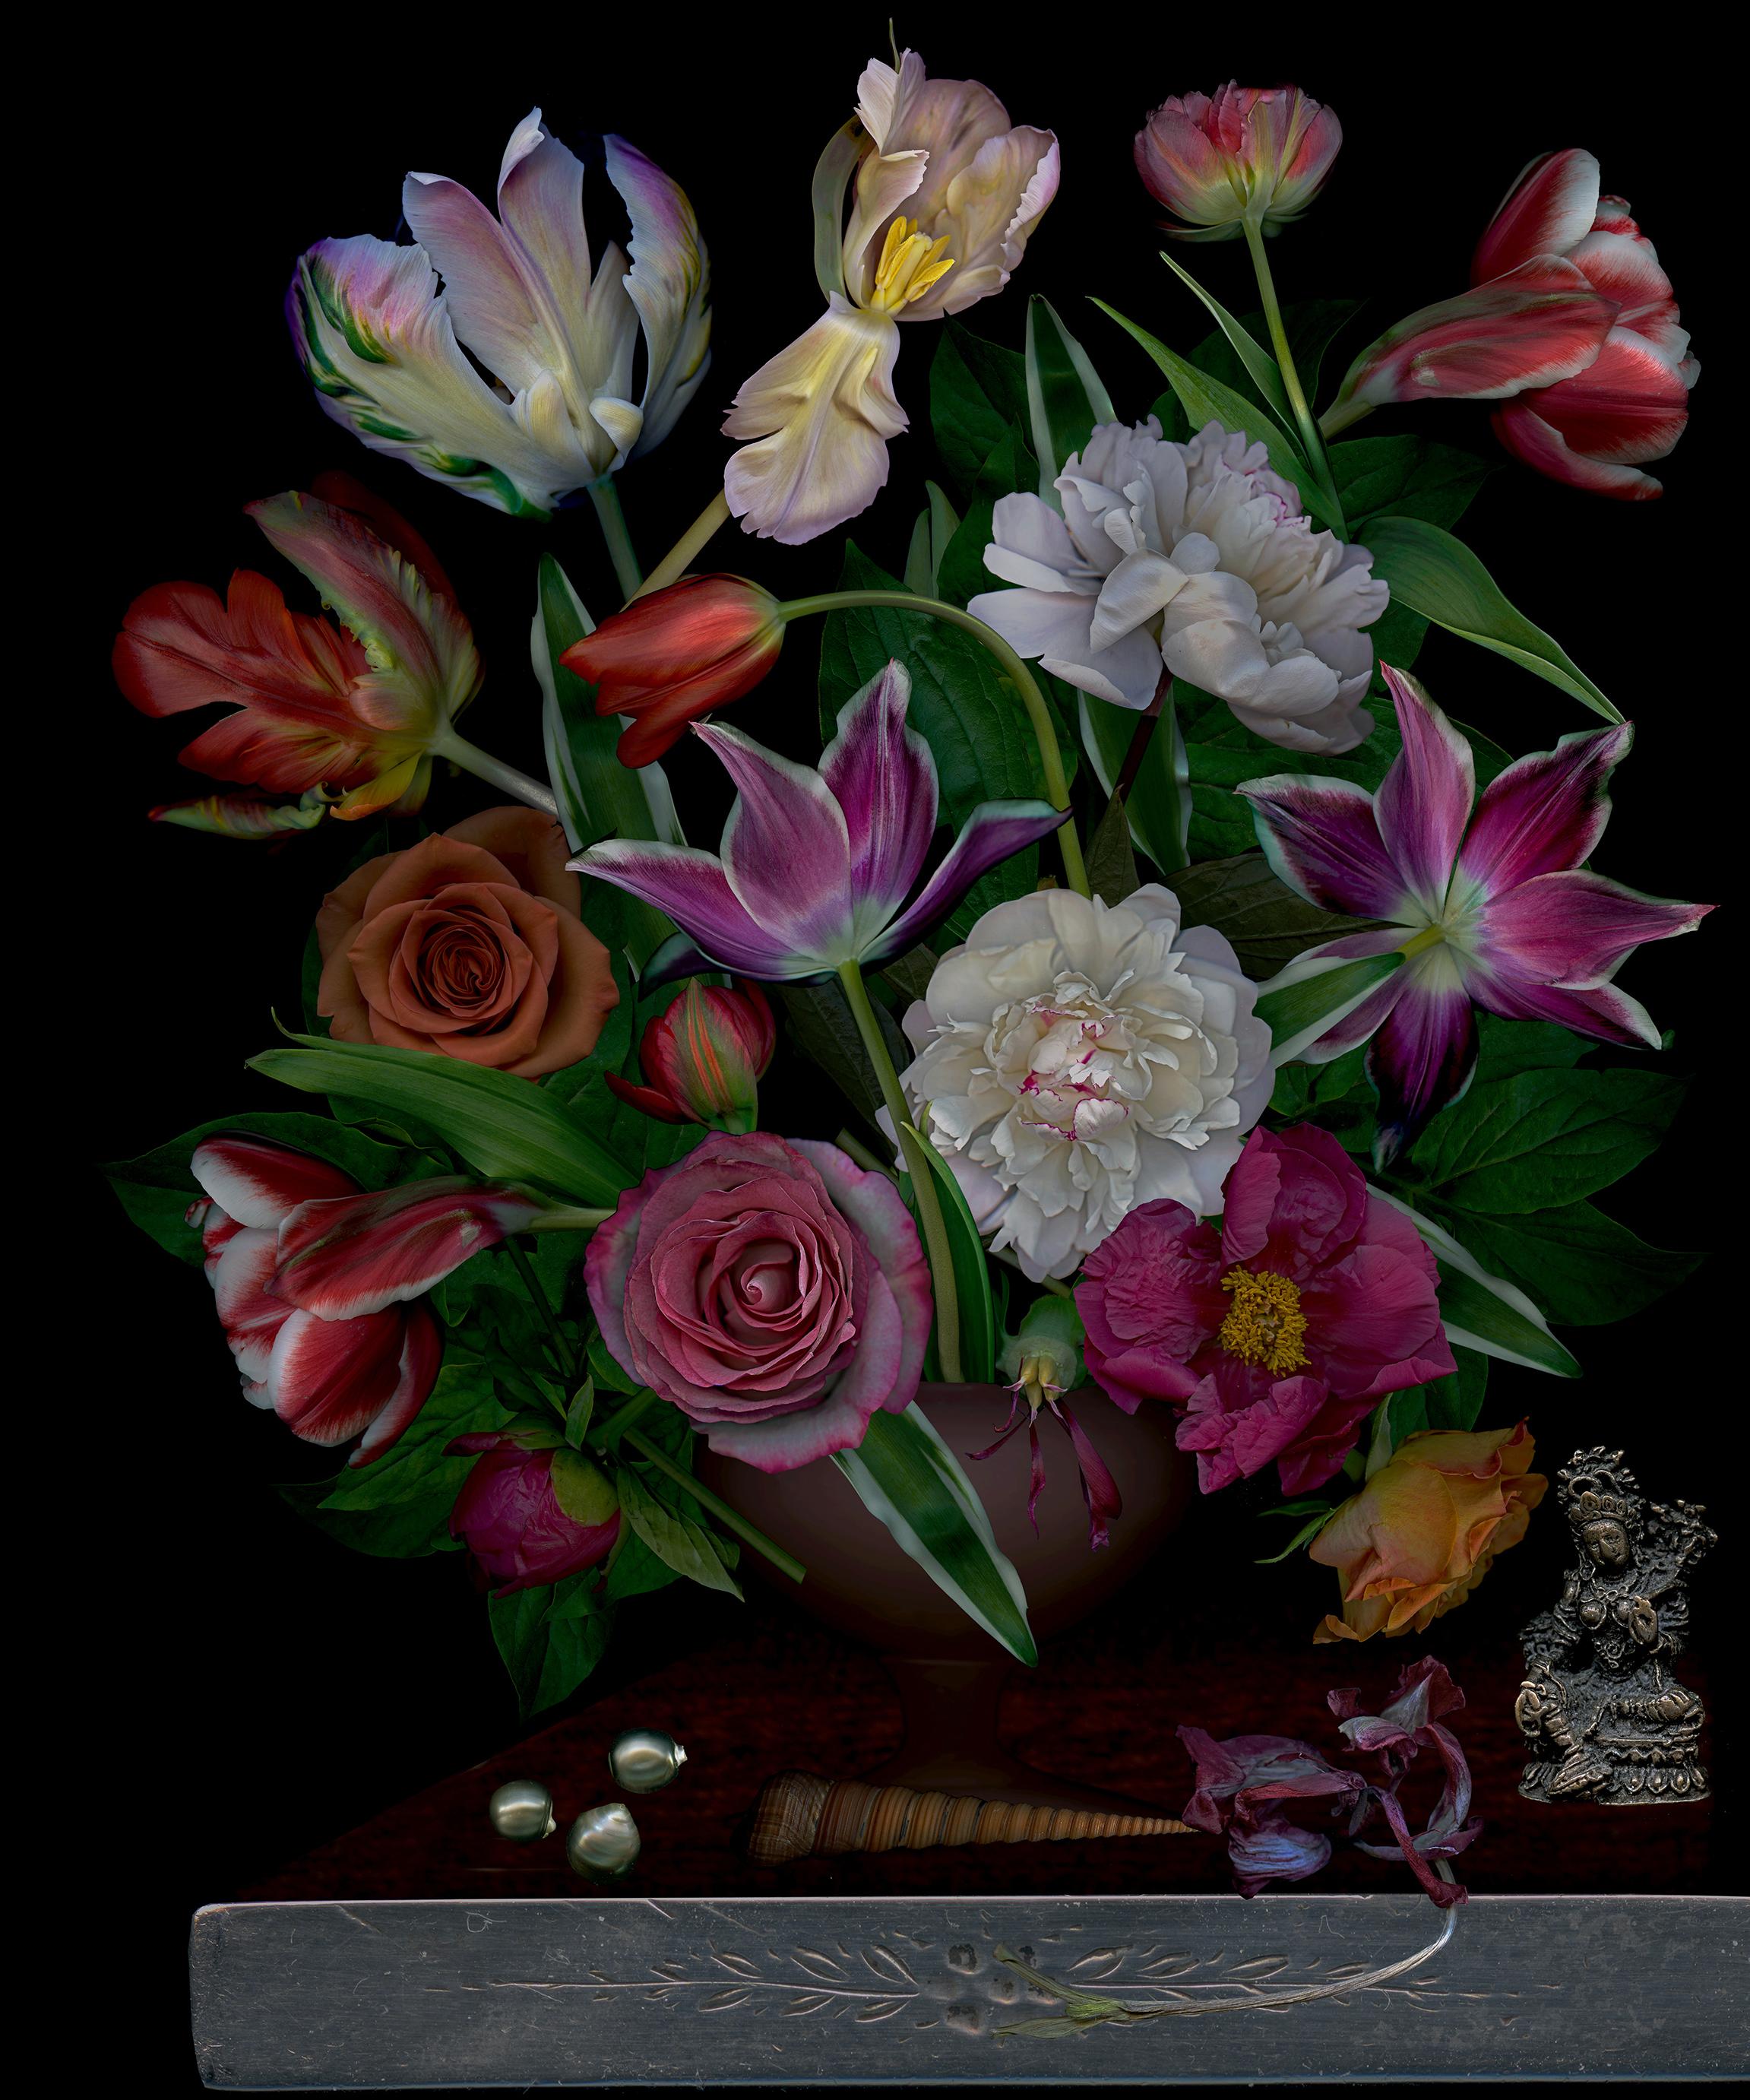 Zoltan Gerliczki Still-Life Photograph - Still Life with Black Pearls. Flowers. Digital Collage Color Photograph